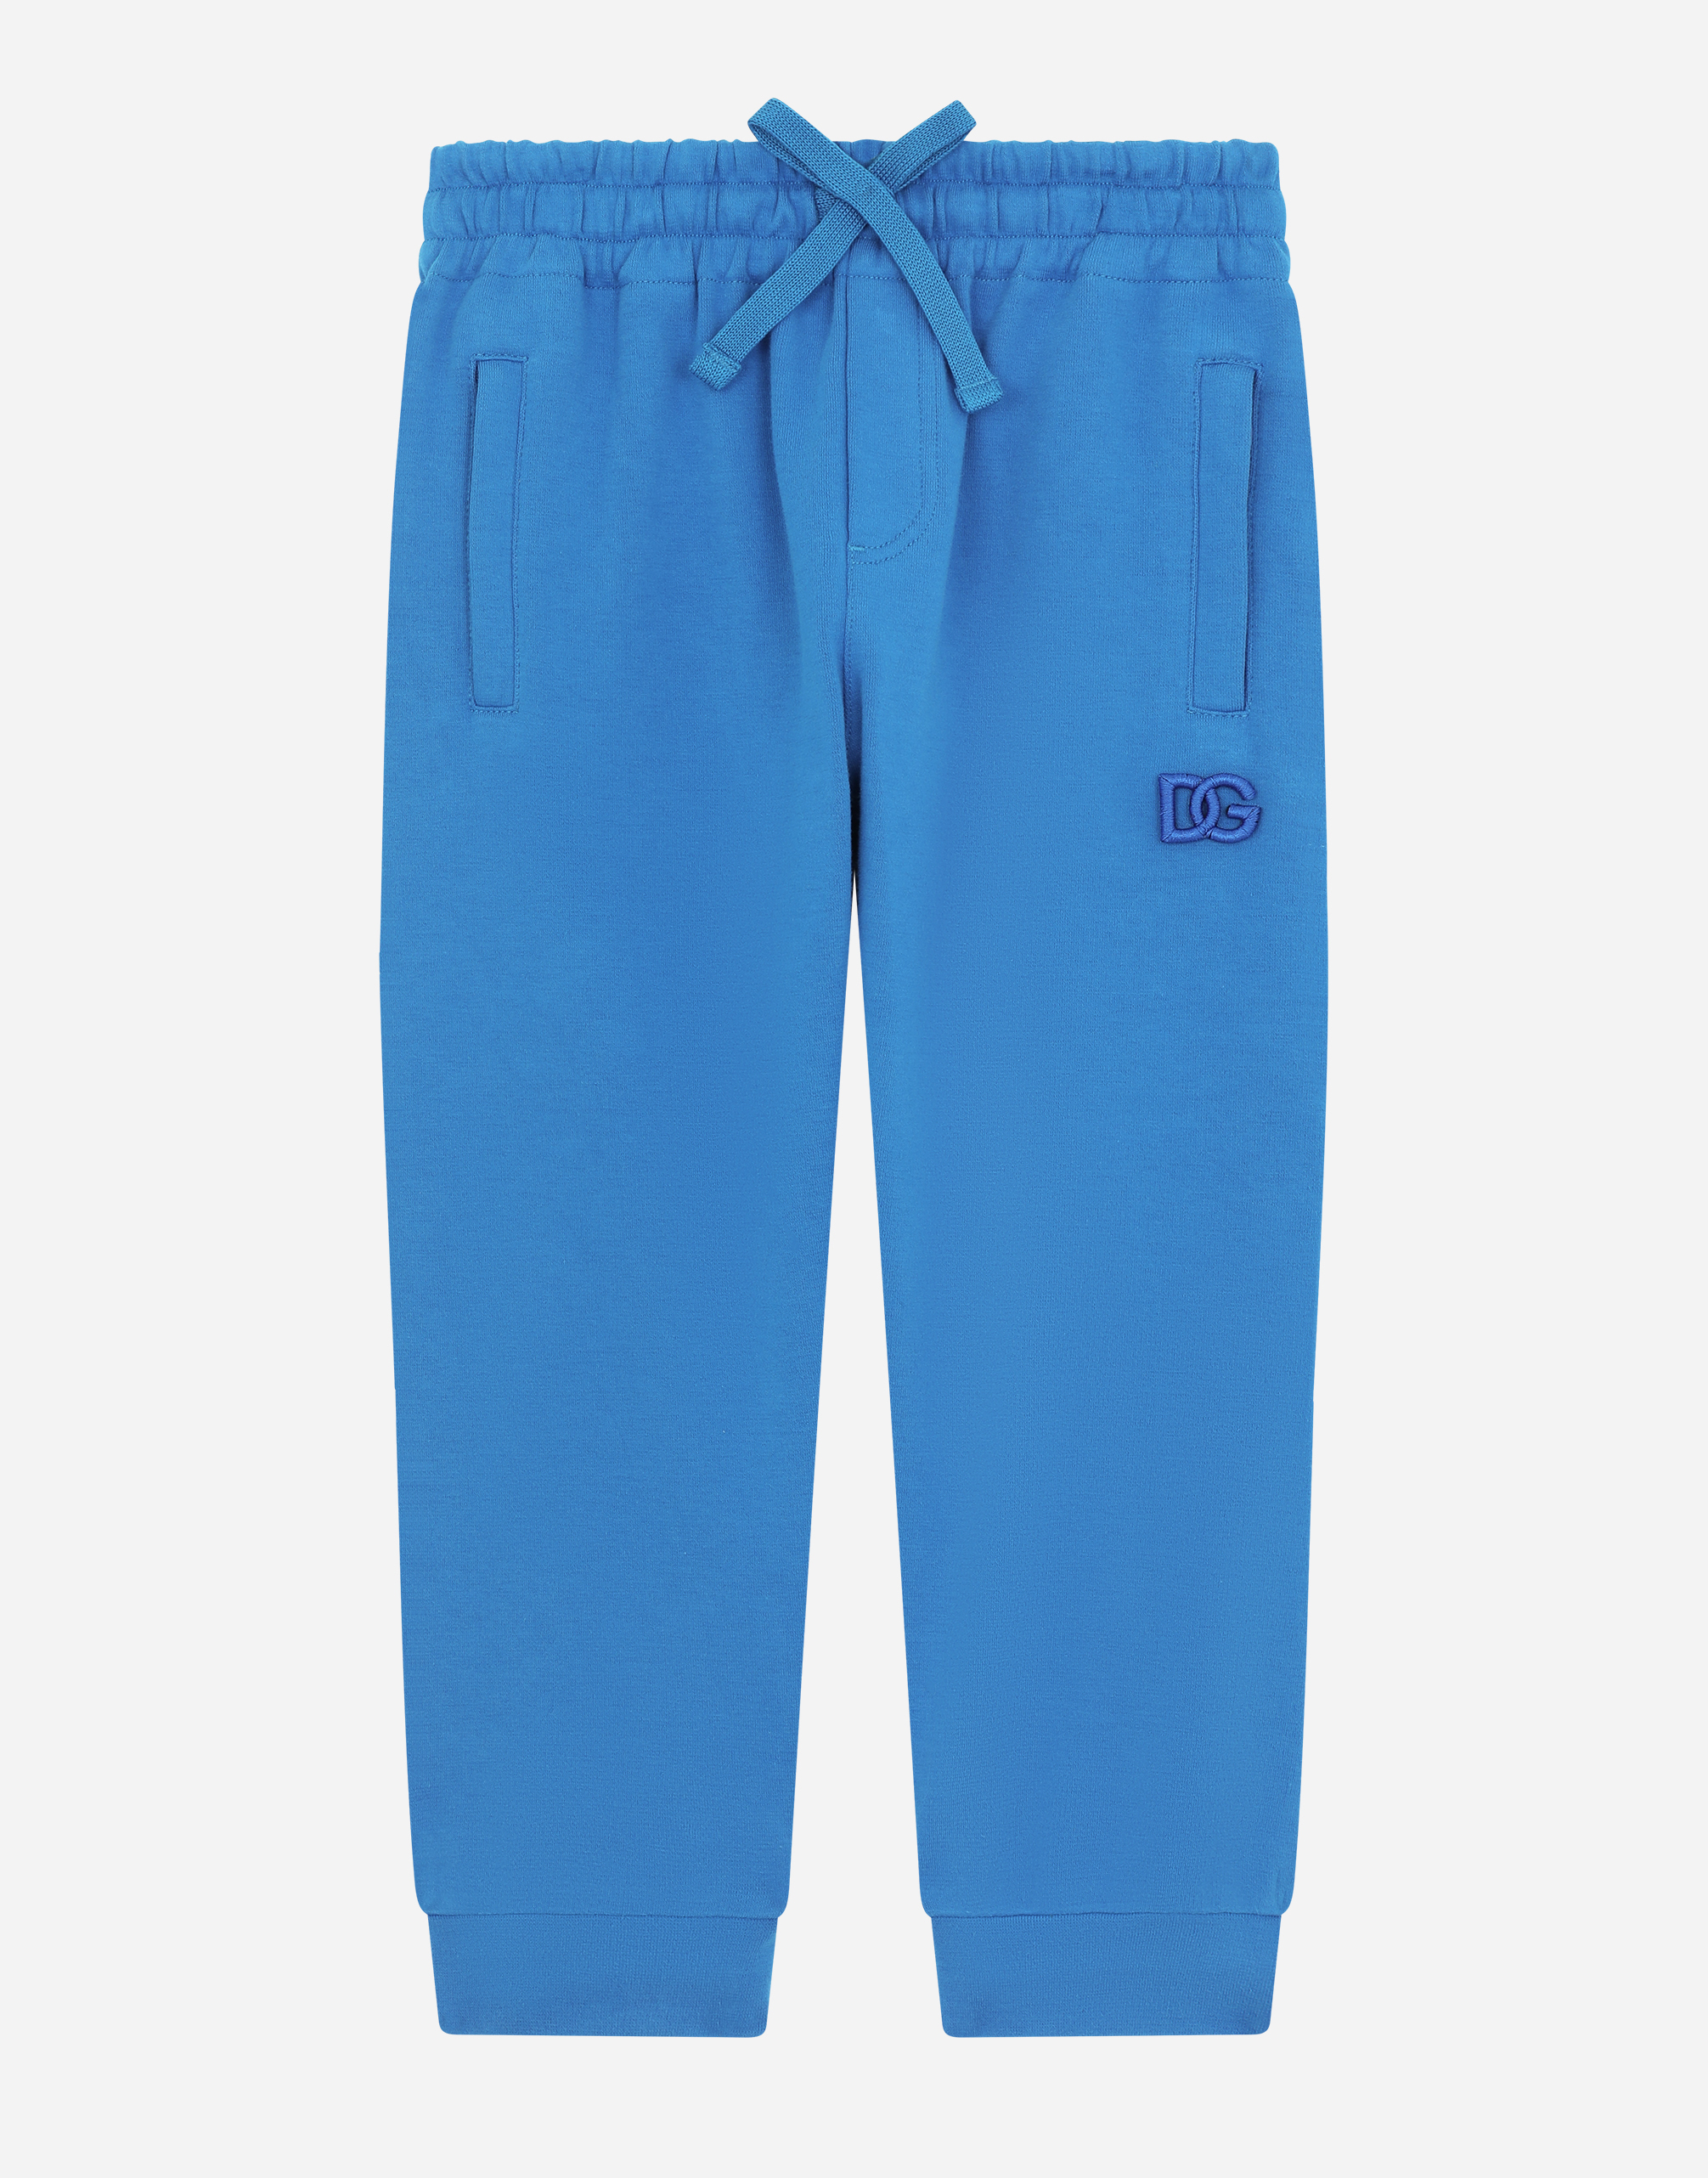 Jersey jogging pants with DG logo embroidery in Turquoise